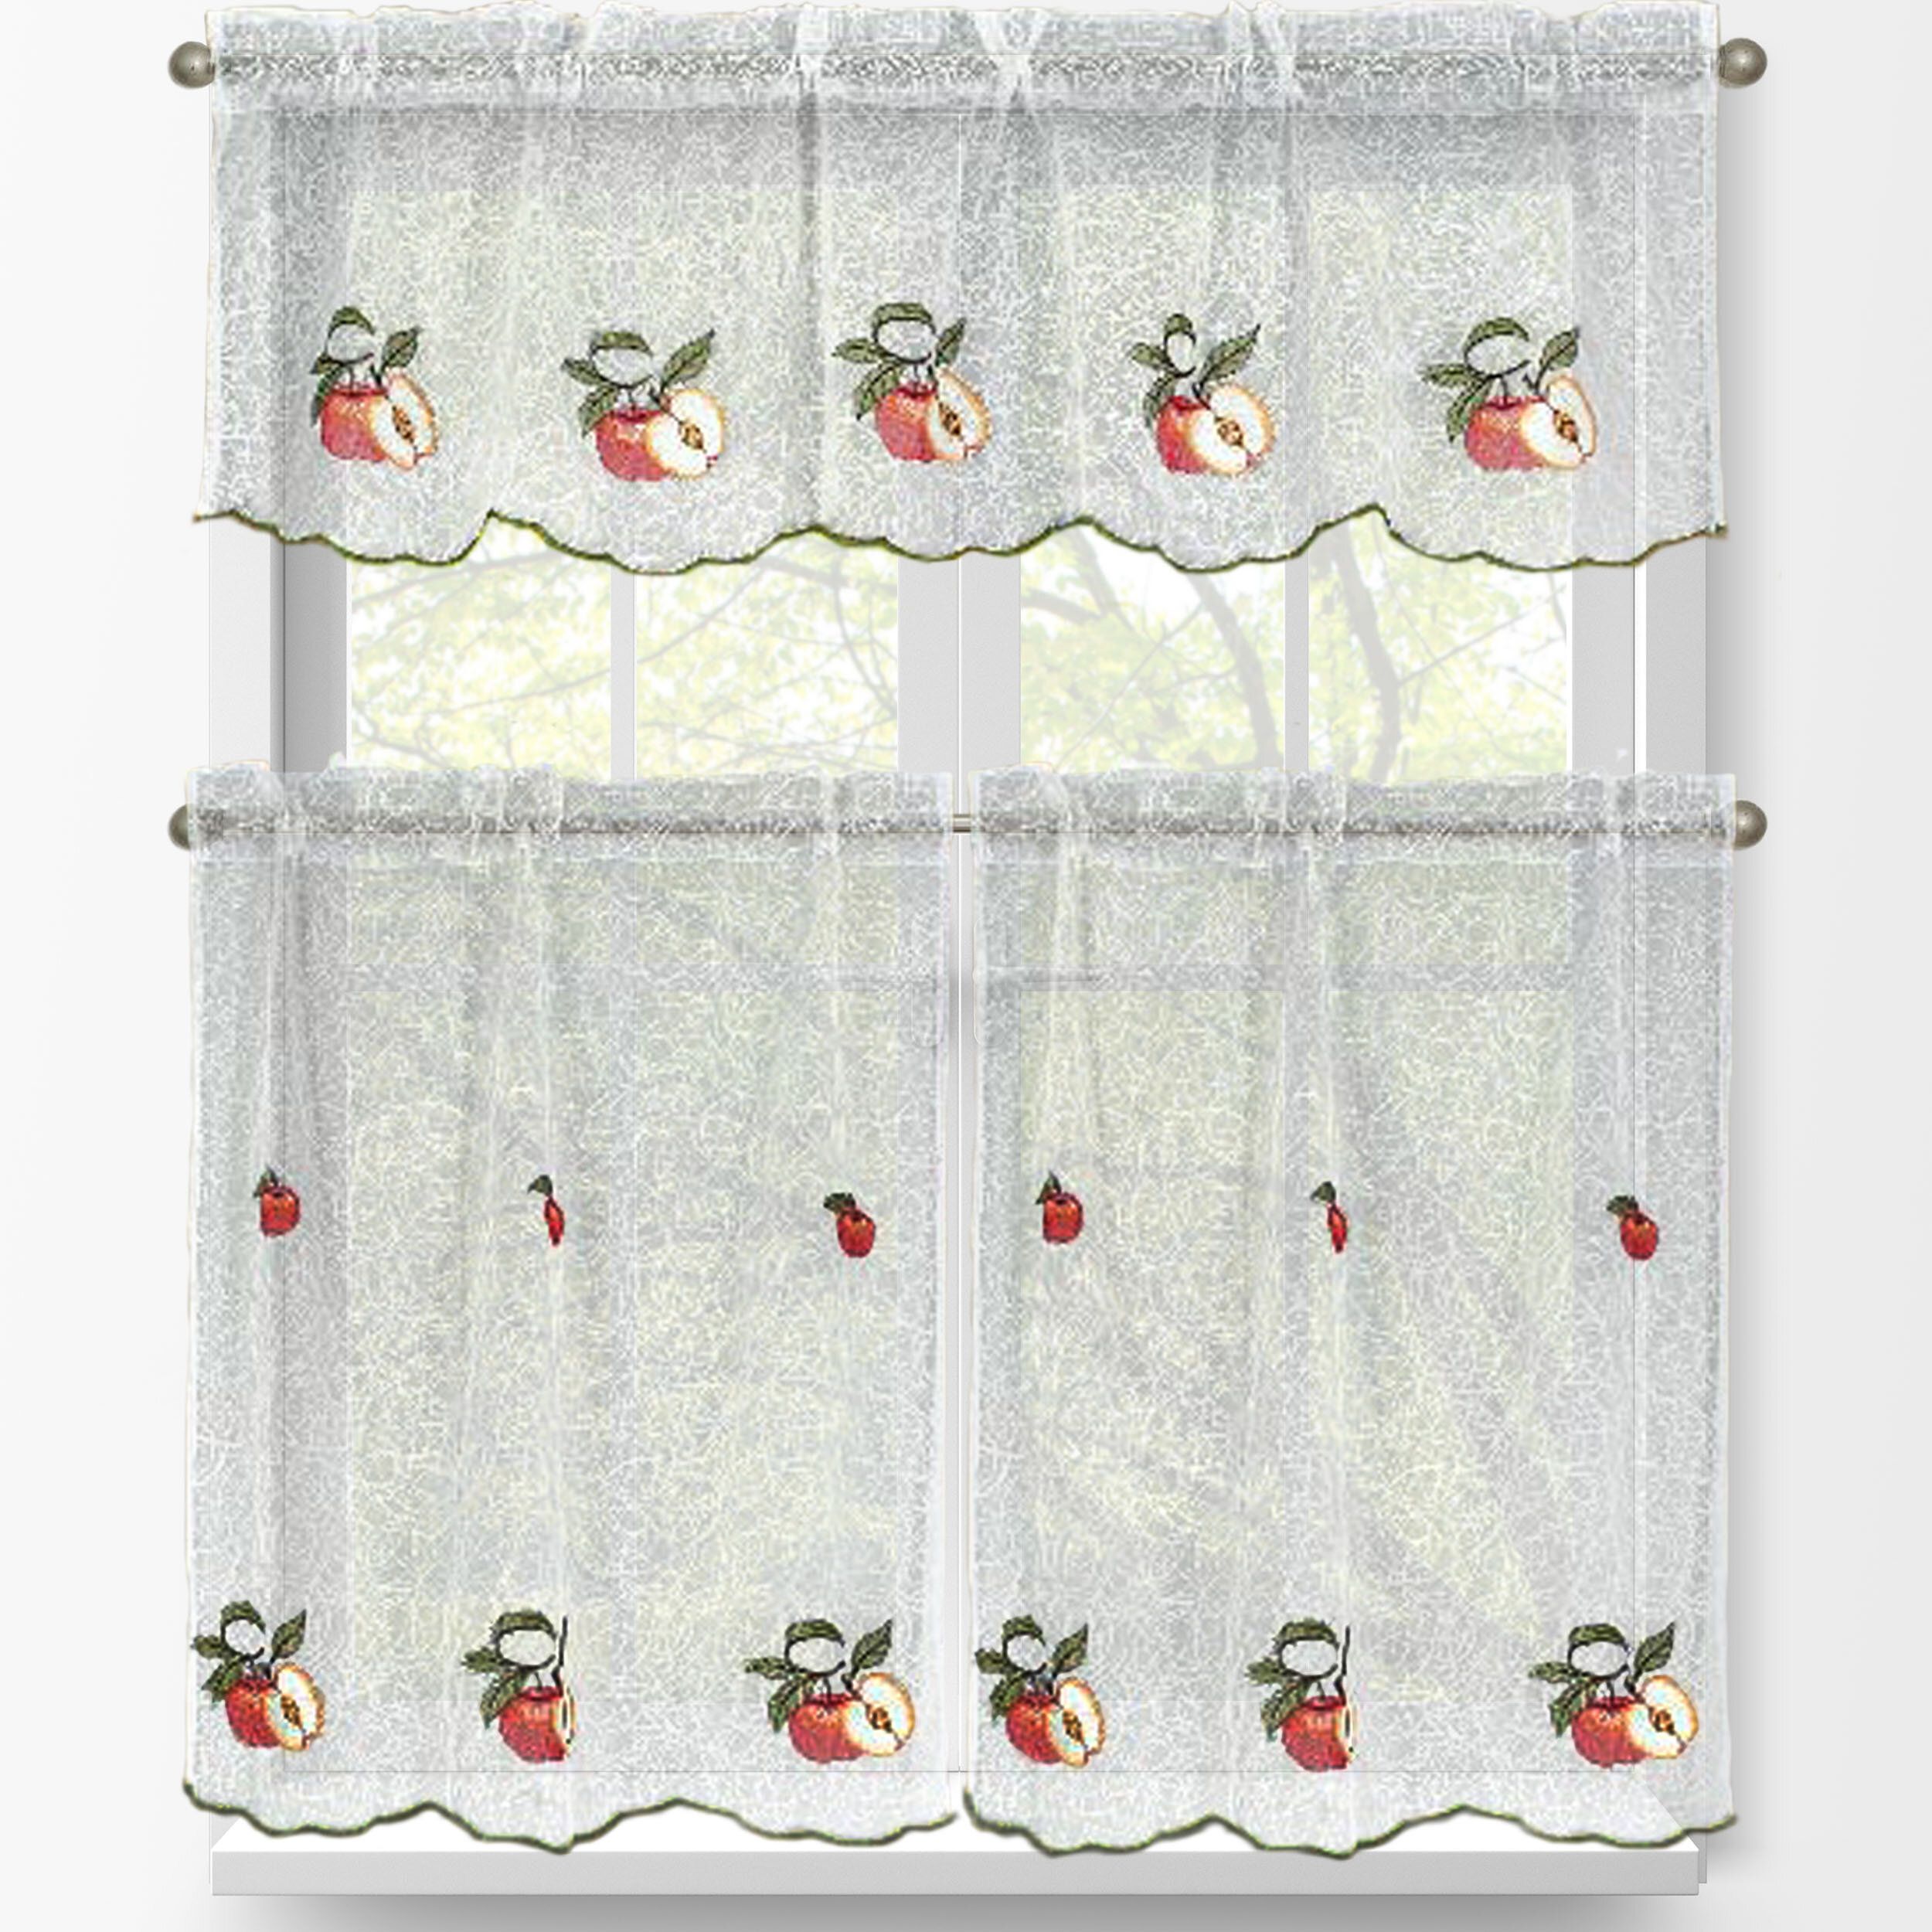 Red Apples 3 Piece Embroidered Kitchen Tier And Valance Set Throughout Delicious Apples Kitchen Curtain Tier And Valance Sets (View 12 of 20)